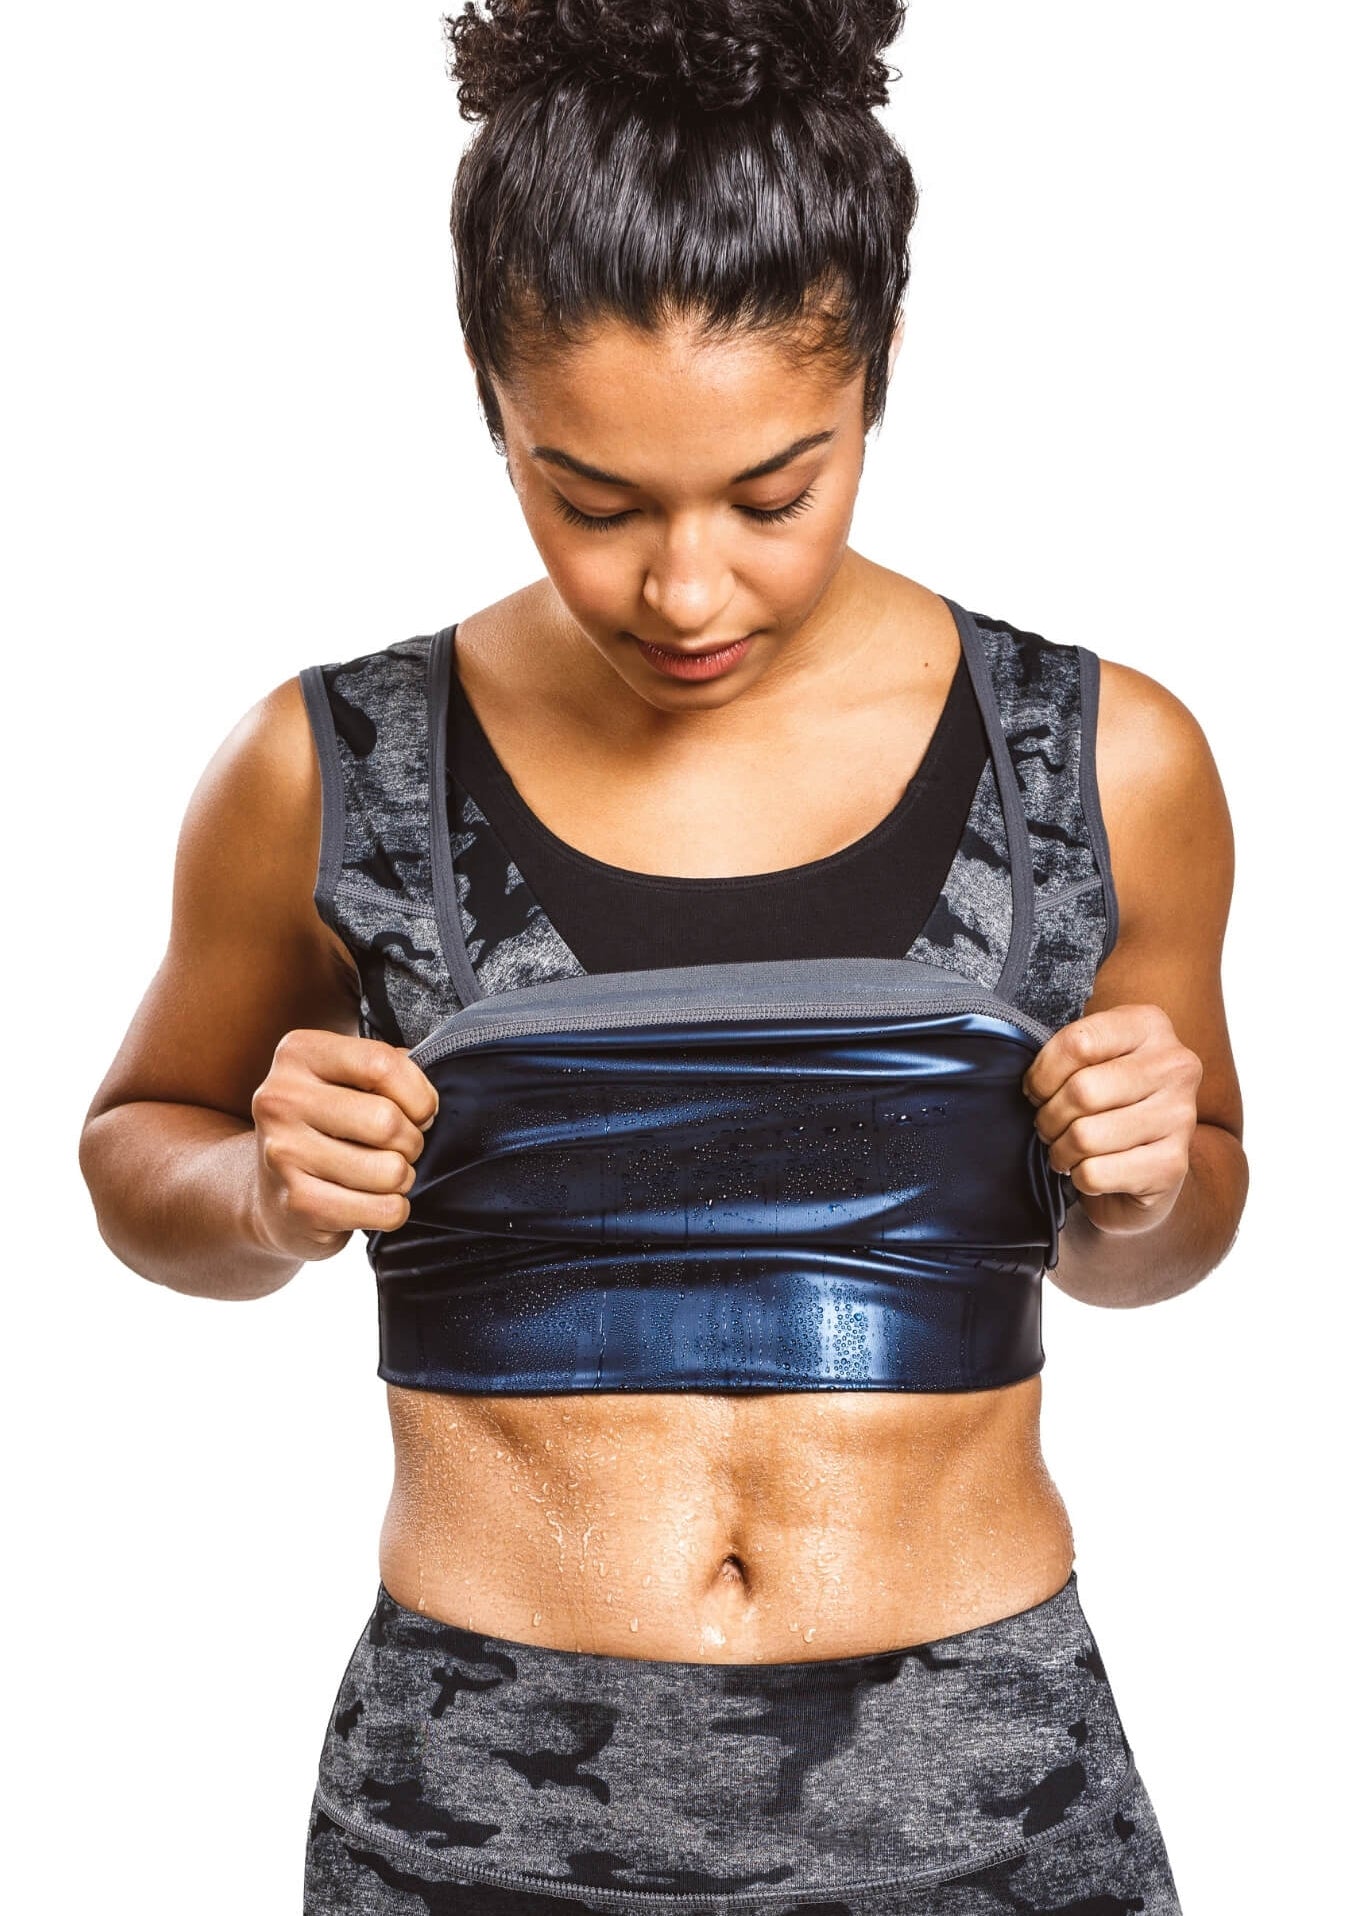 Compare prices for Sweat Shaper across all European  stores